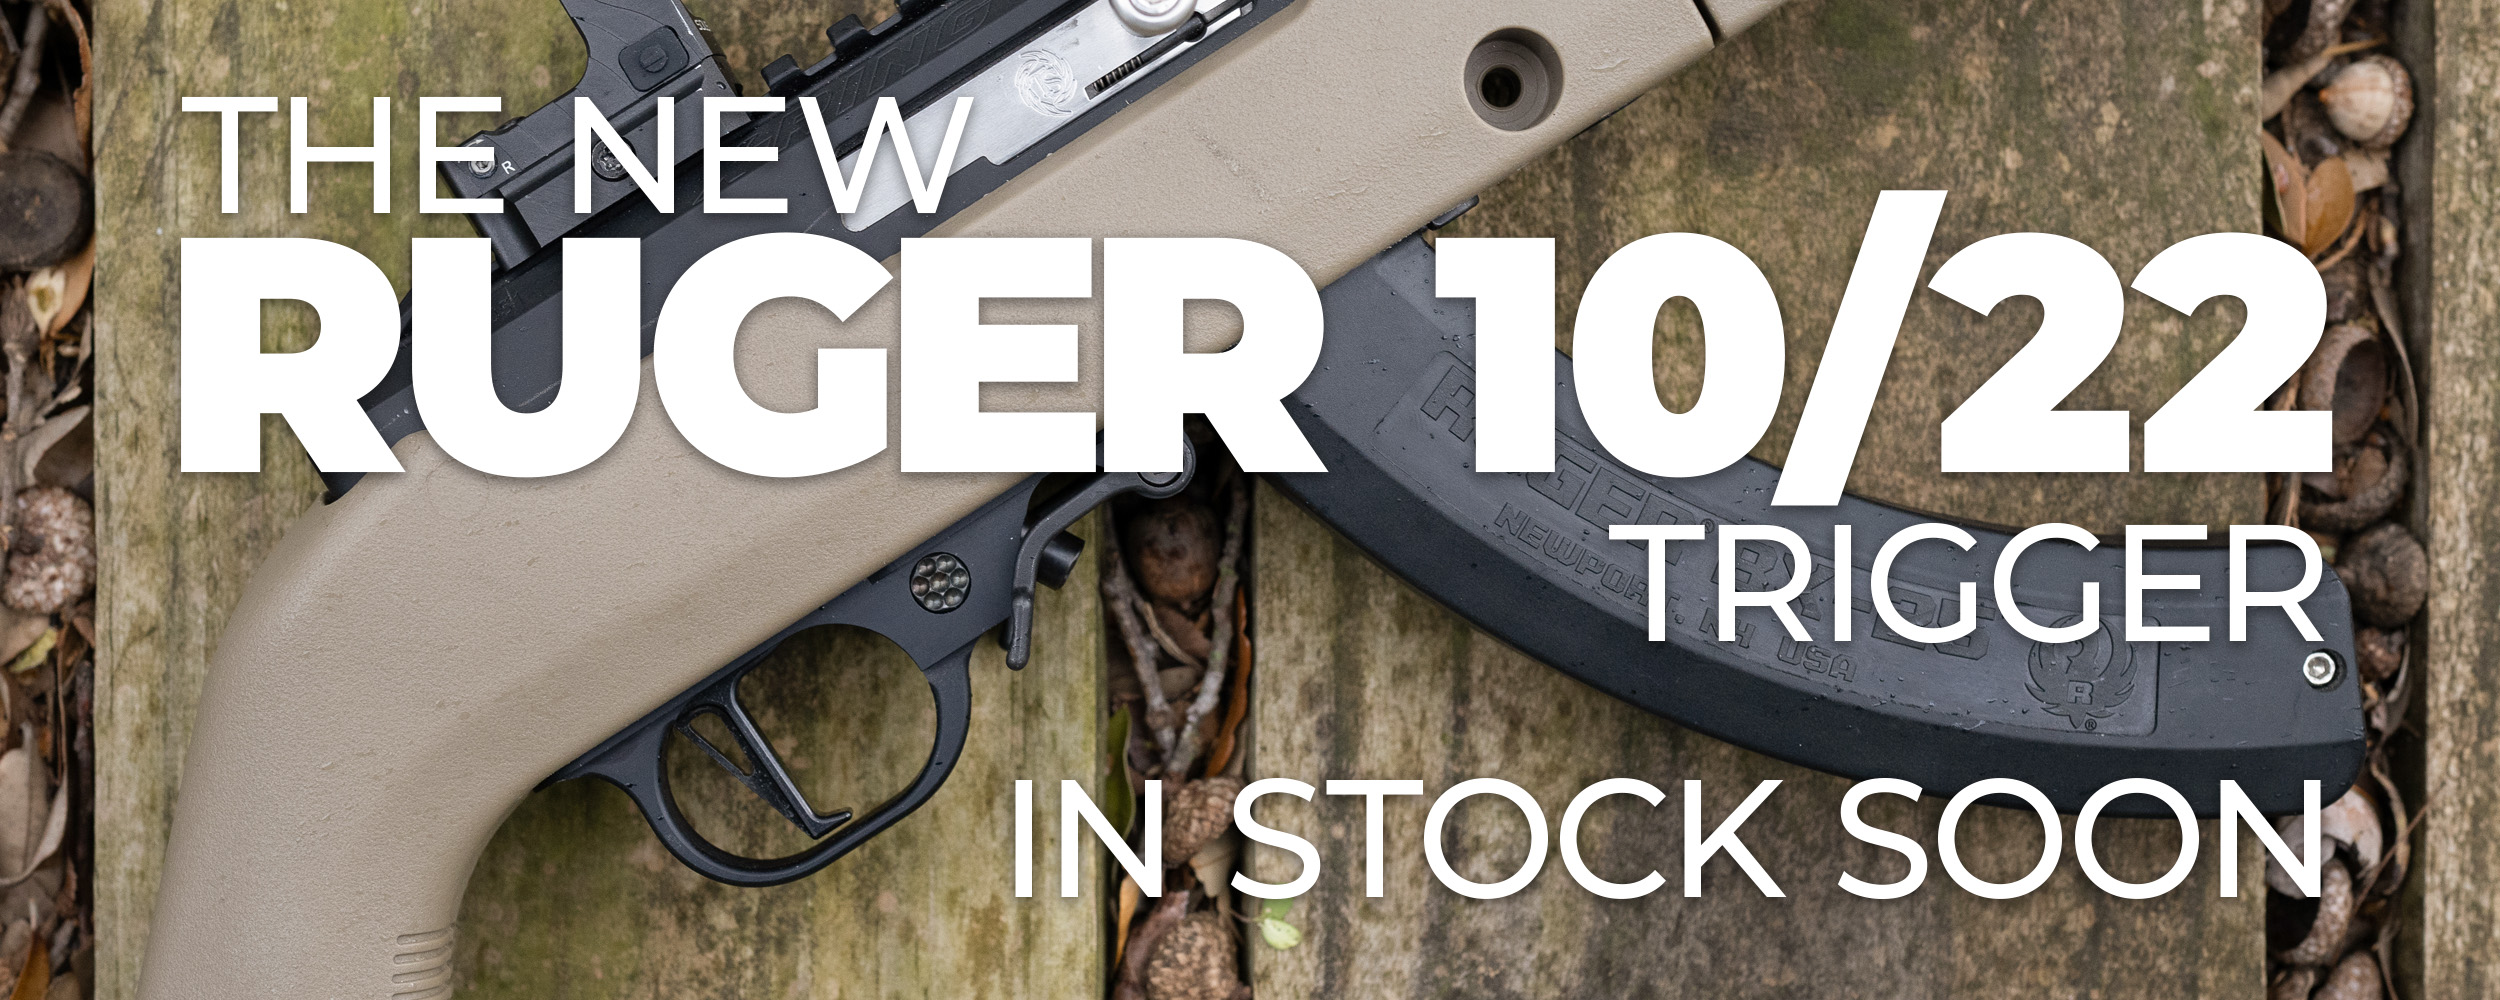 The New Ruger 10/22 Trigger - In Stock Soon